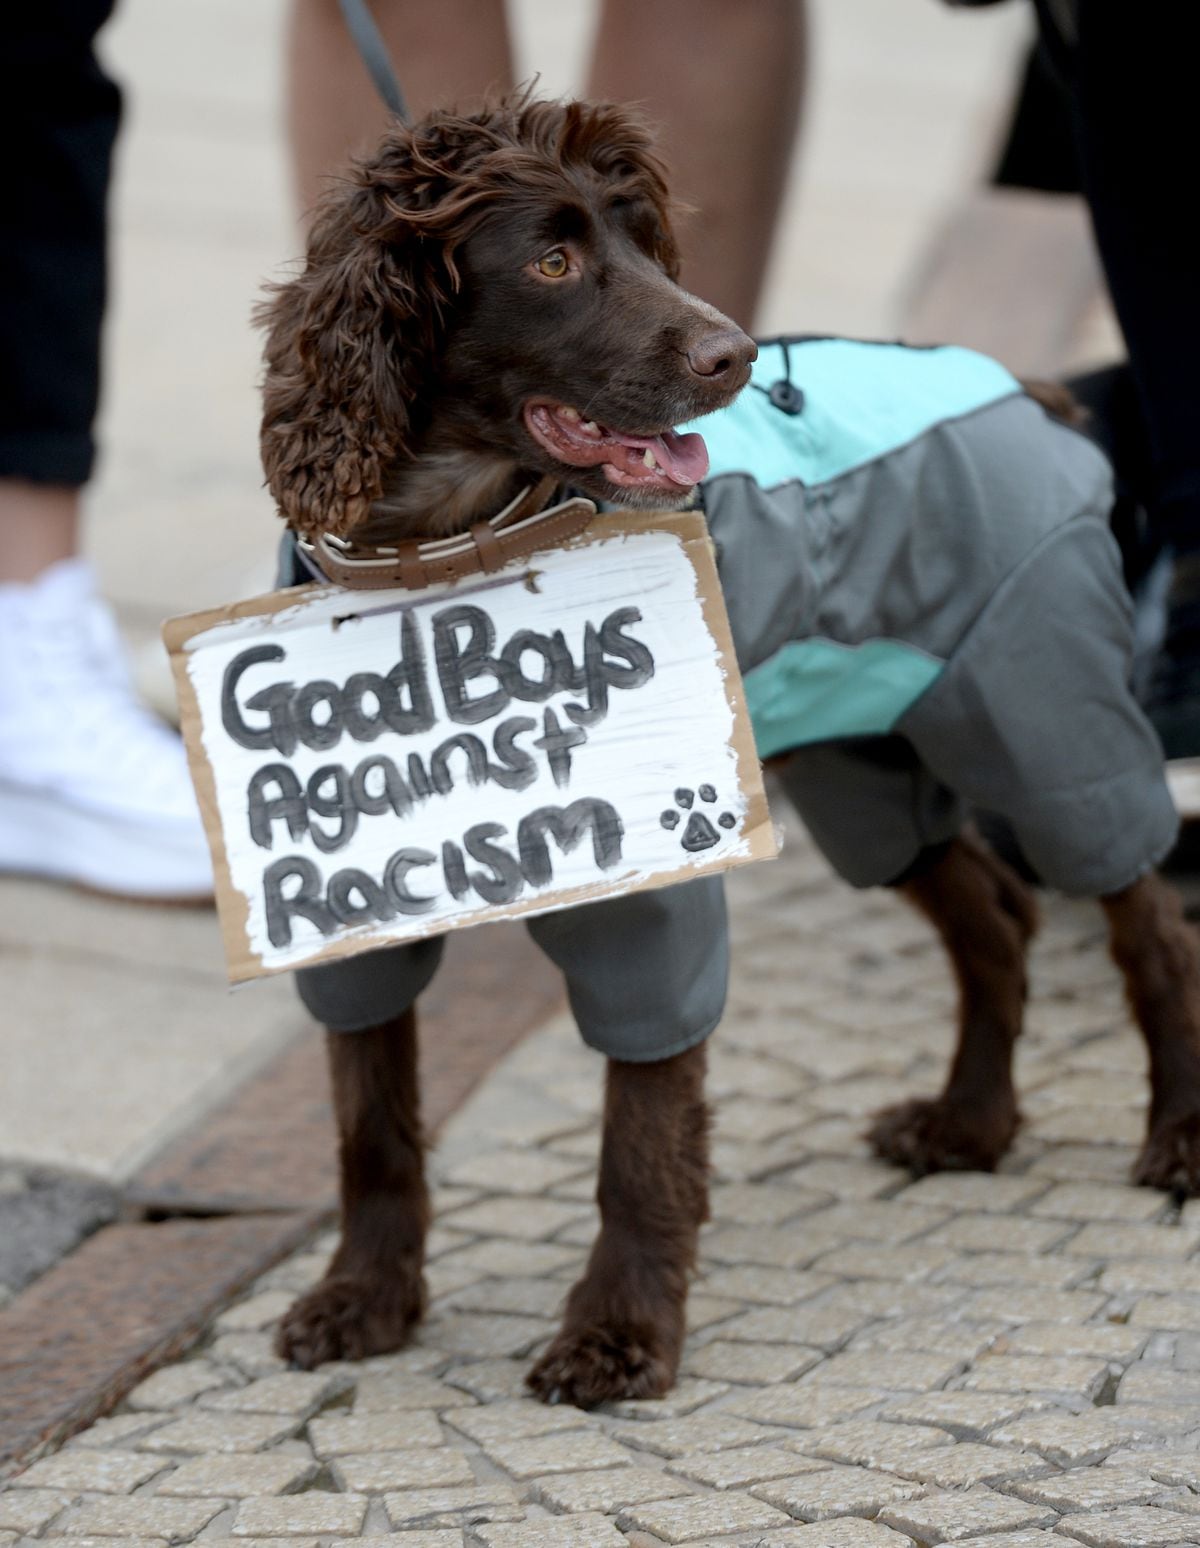 Even man's best friend was keen to take part in the protest